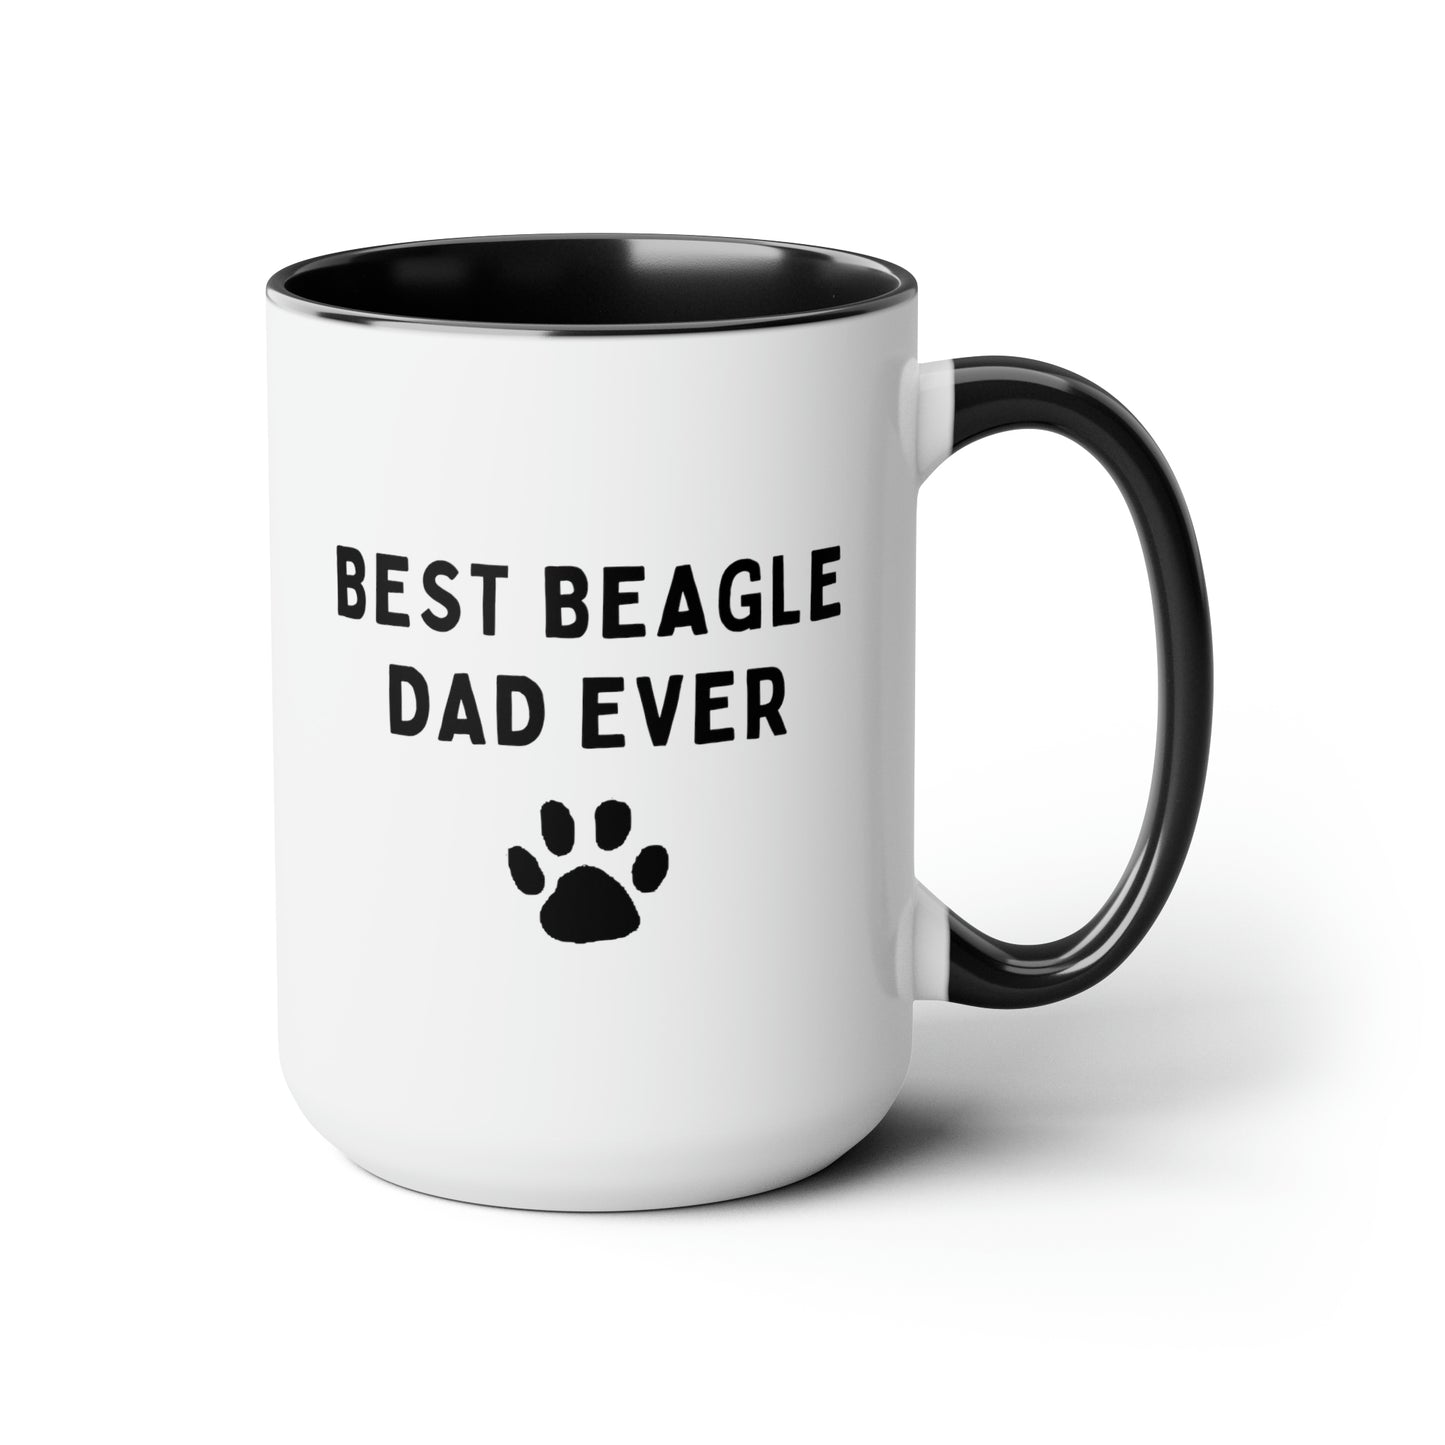 Best Beagle Dad Ever 15oz white with black accent funny large coffee mug gift for father's day him granddad dog lover pet owner furparent  waveywares wavey wares wavywares wavy wares